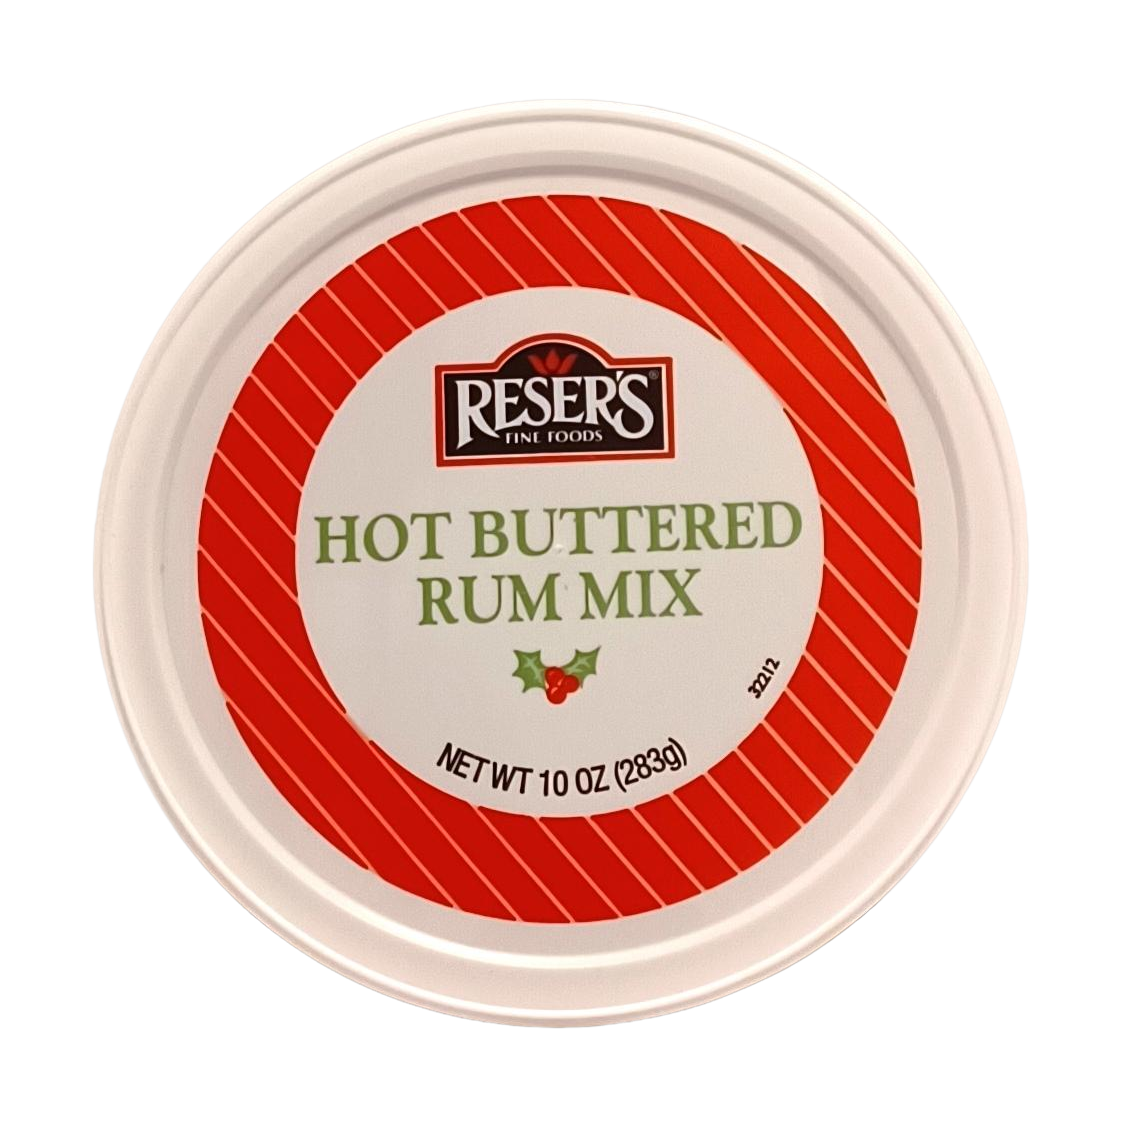 Reser's Hot Buttered Rum Mix 18 ct. Case